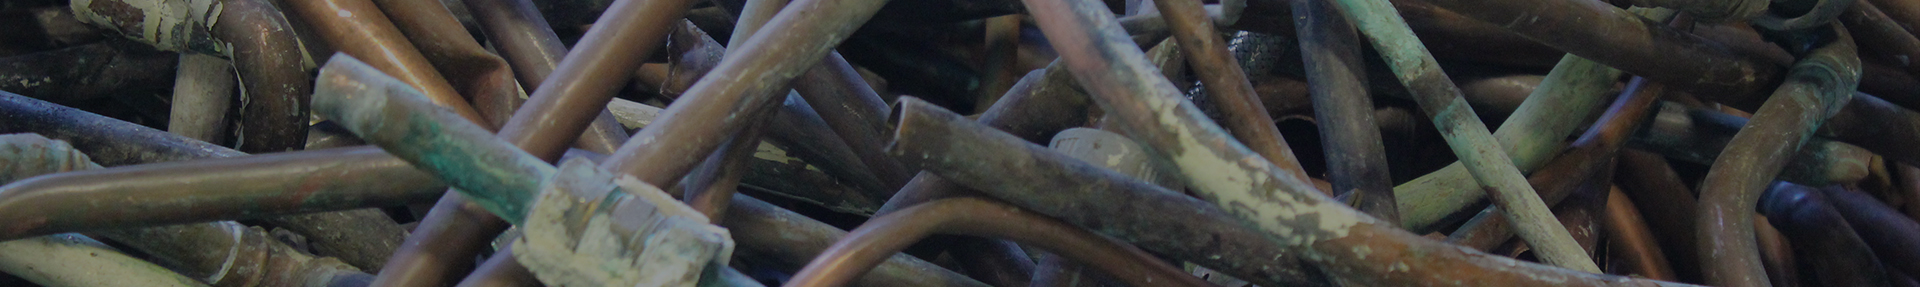 Ferrous Metals in a pile awaiting recycling